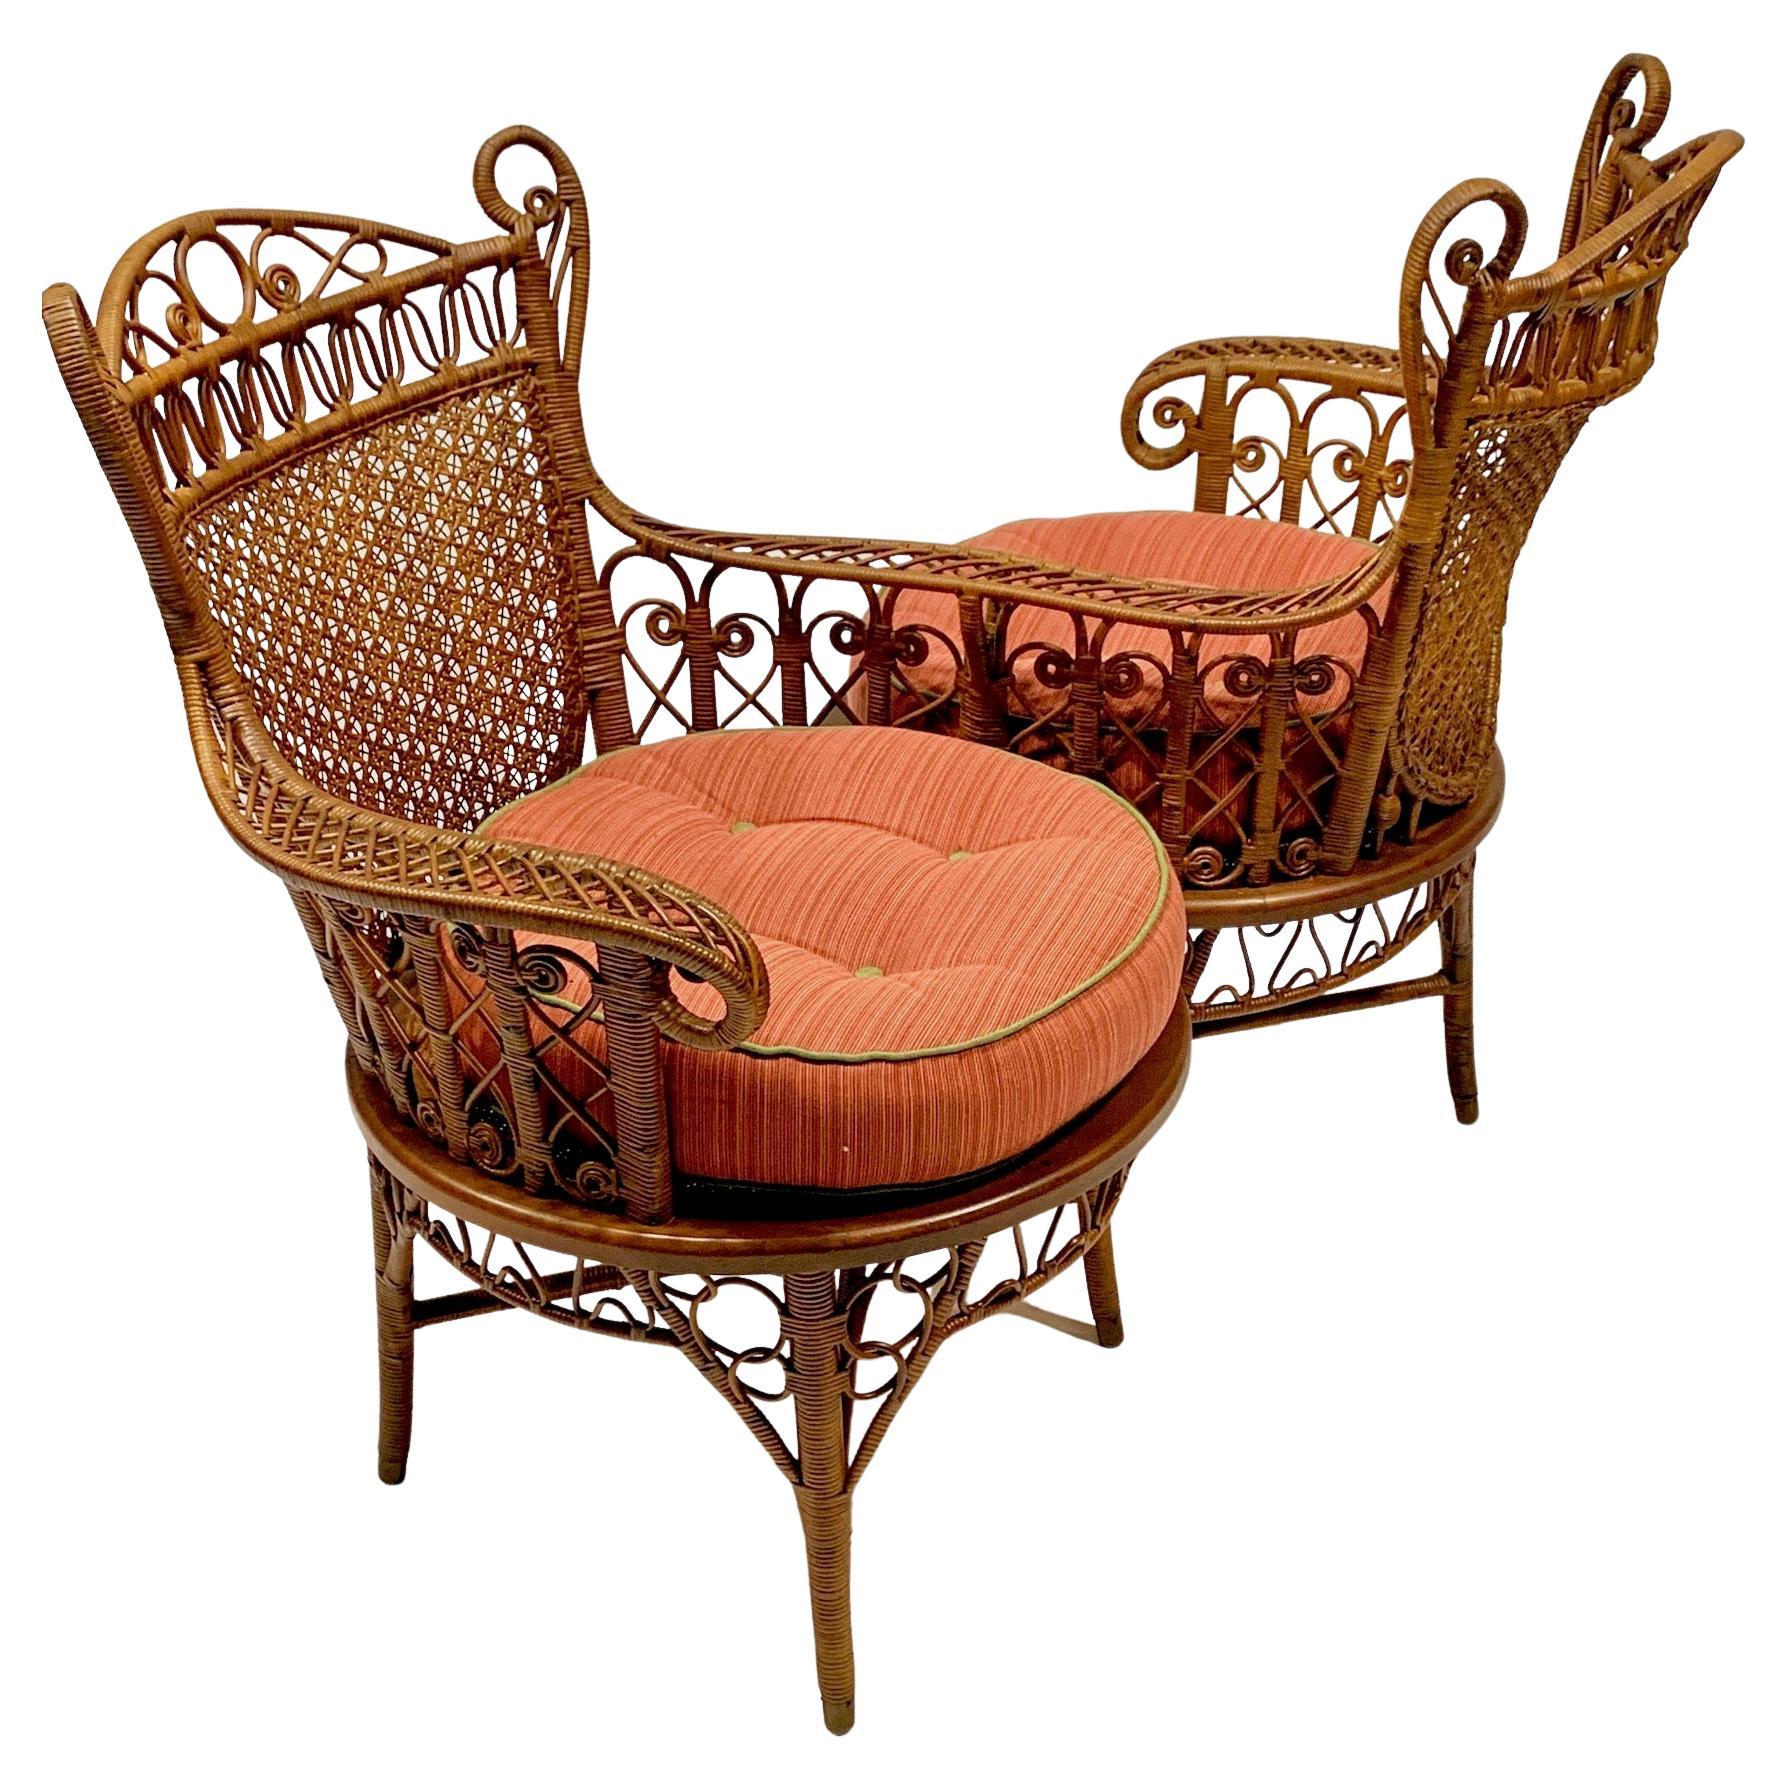 19th C. Wicker Conversation Chair with Intricate Caned Backs in Natural Finish